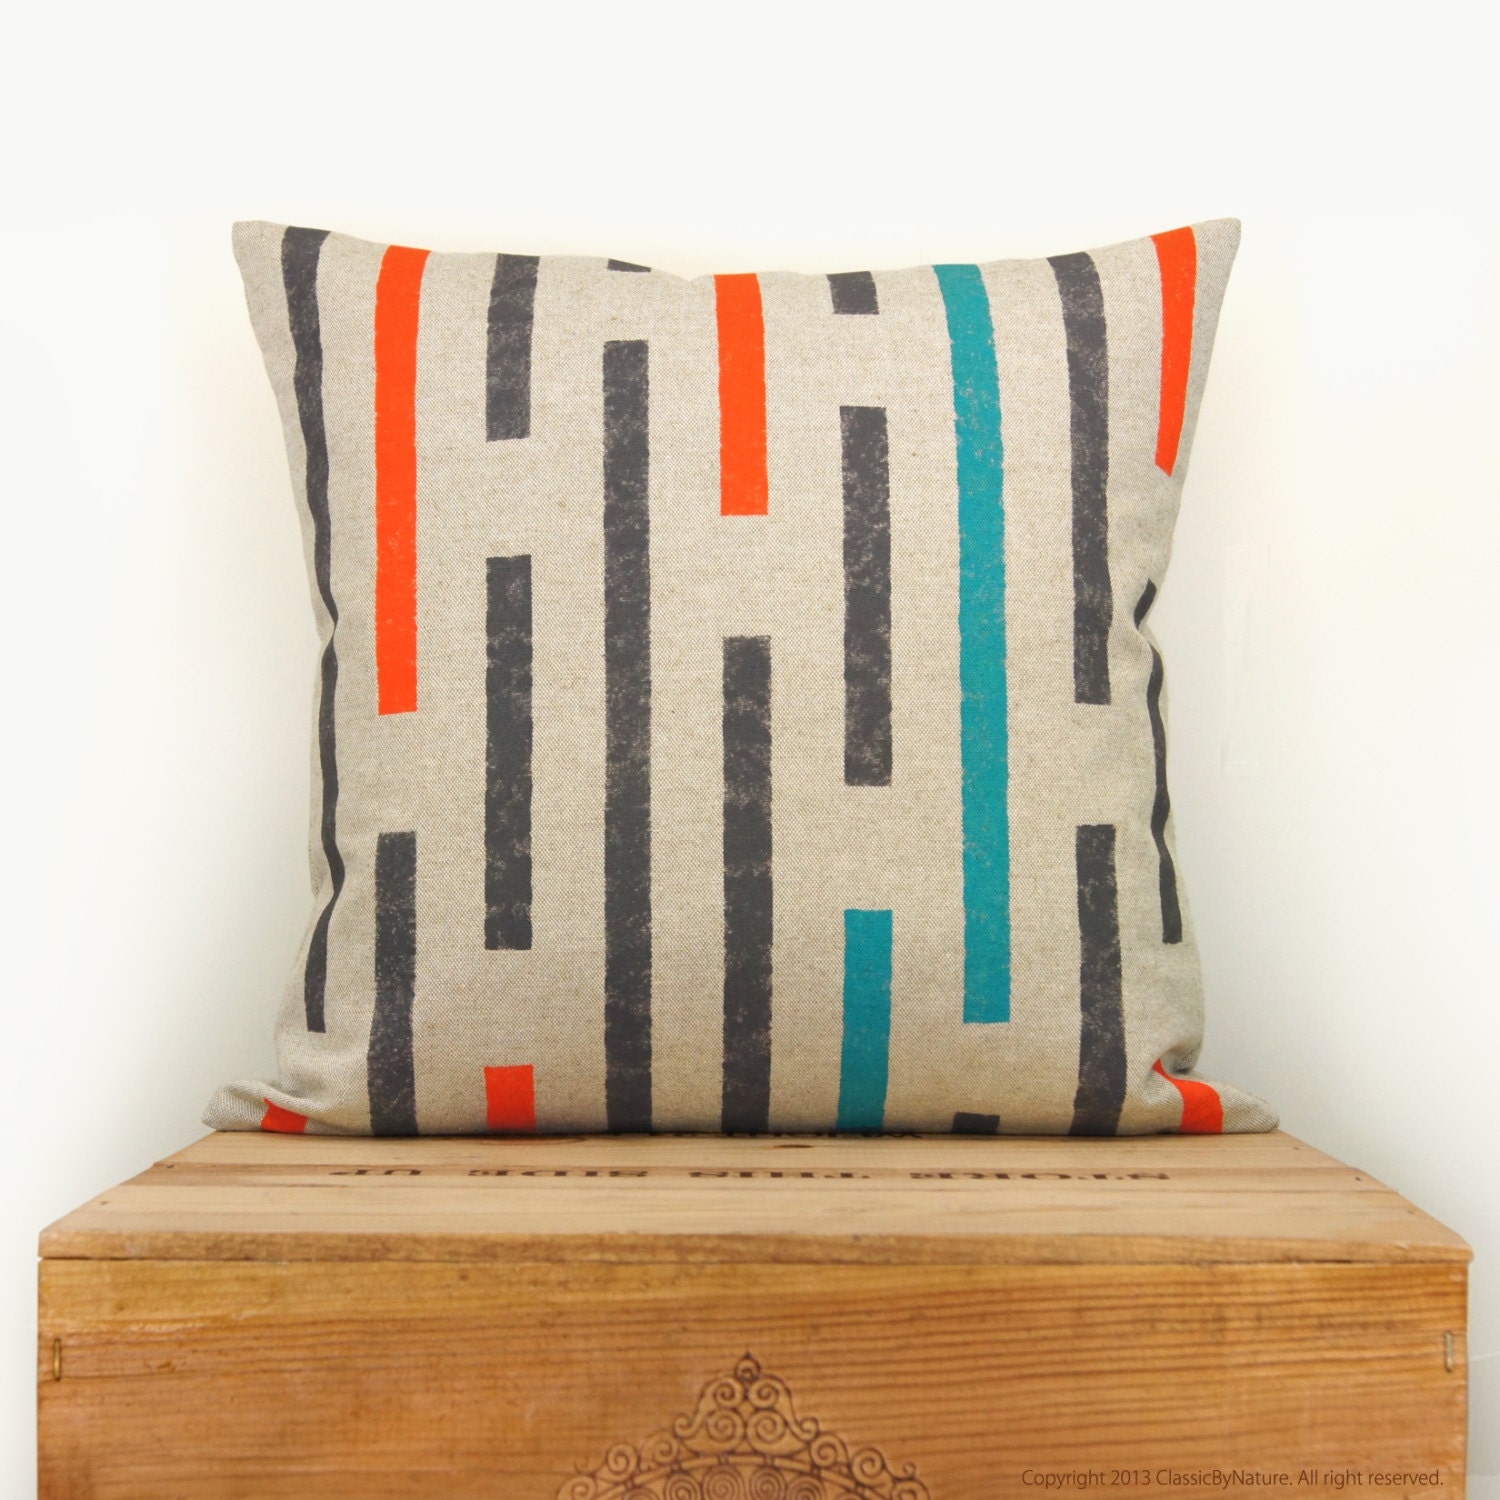 Throw pillow covers - Handprinted pillow in charcoal grey, orange, turquoise and natural beige with geometric stripes design - 16x16 size - ClassicByNature